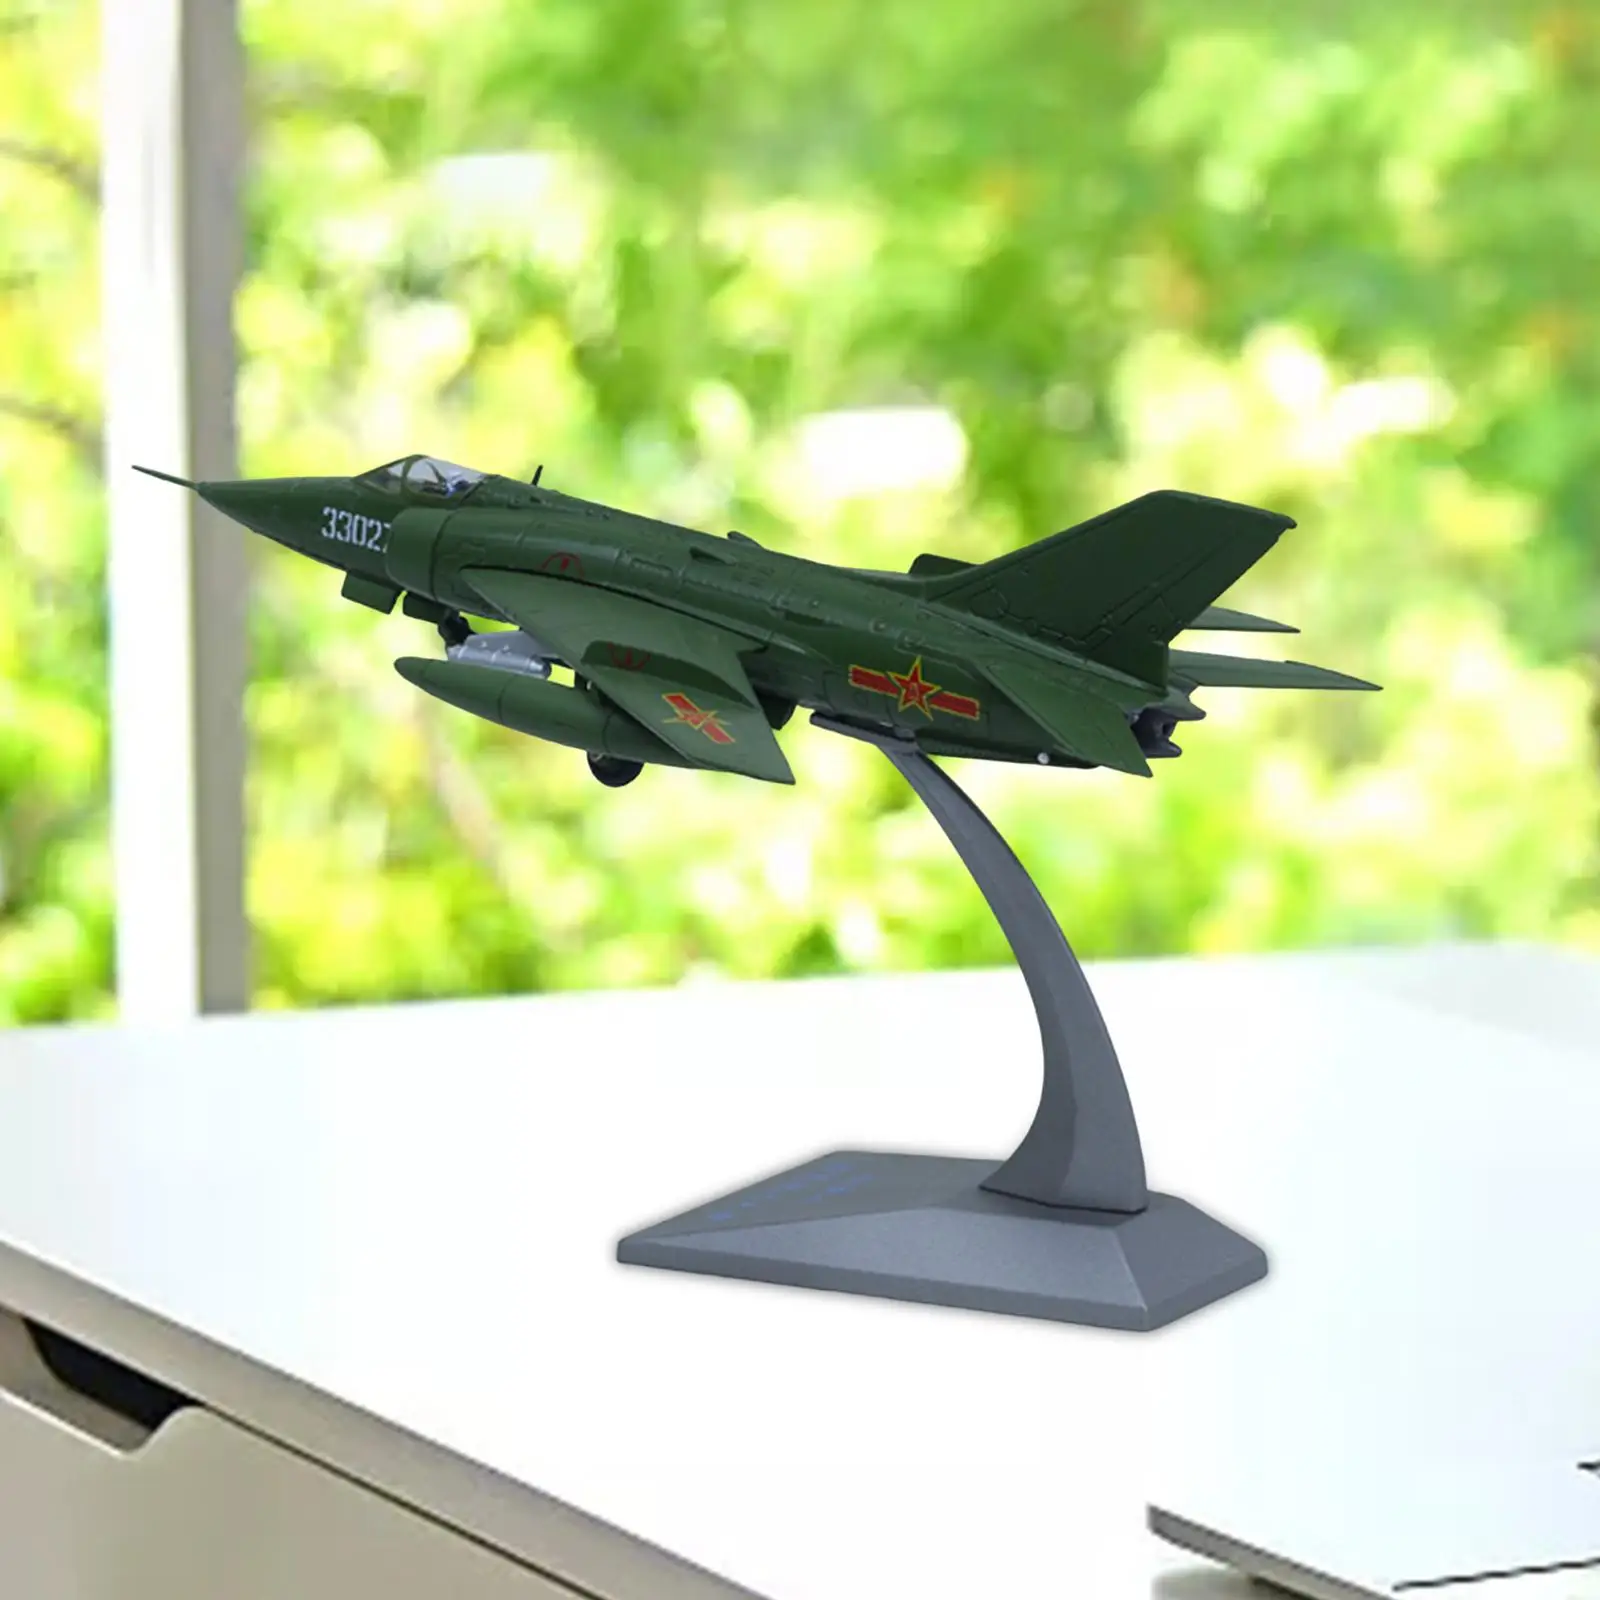 1:72 Aircraft Model Desktop Display Aviation Collectibles Fighter Airplane for Collection Fireplace Office Decor Holiday Gifts